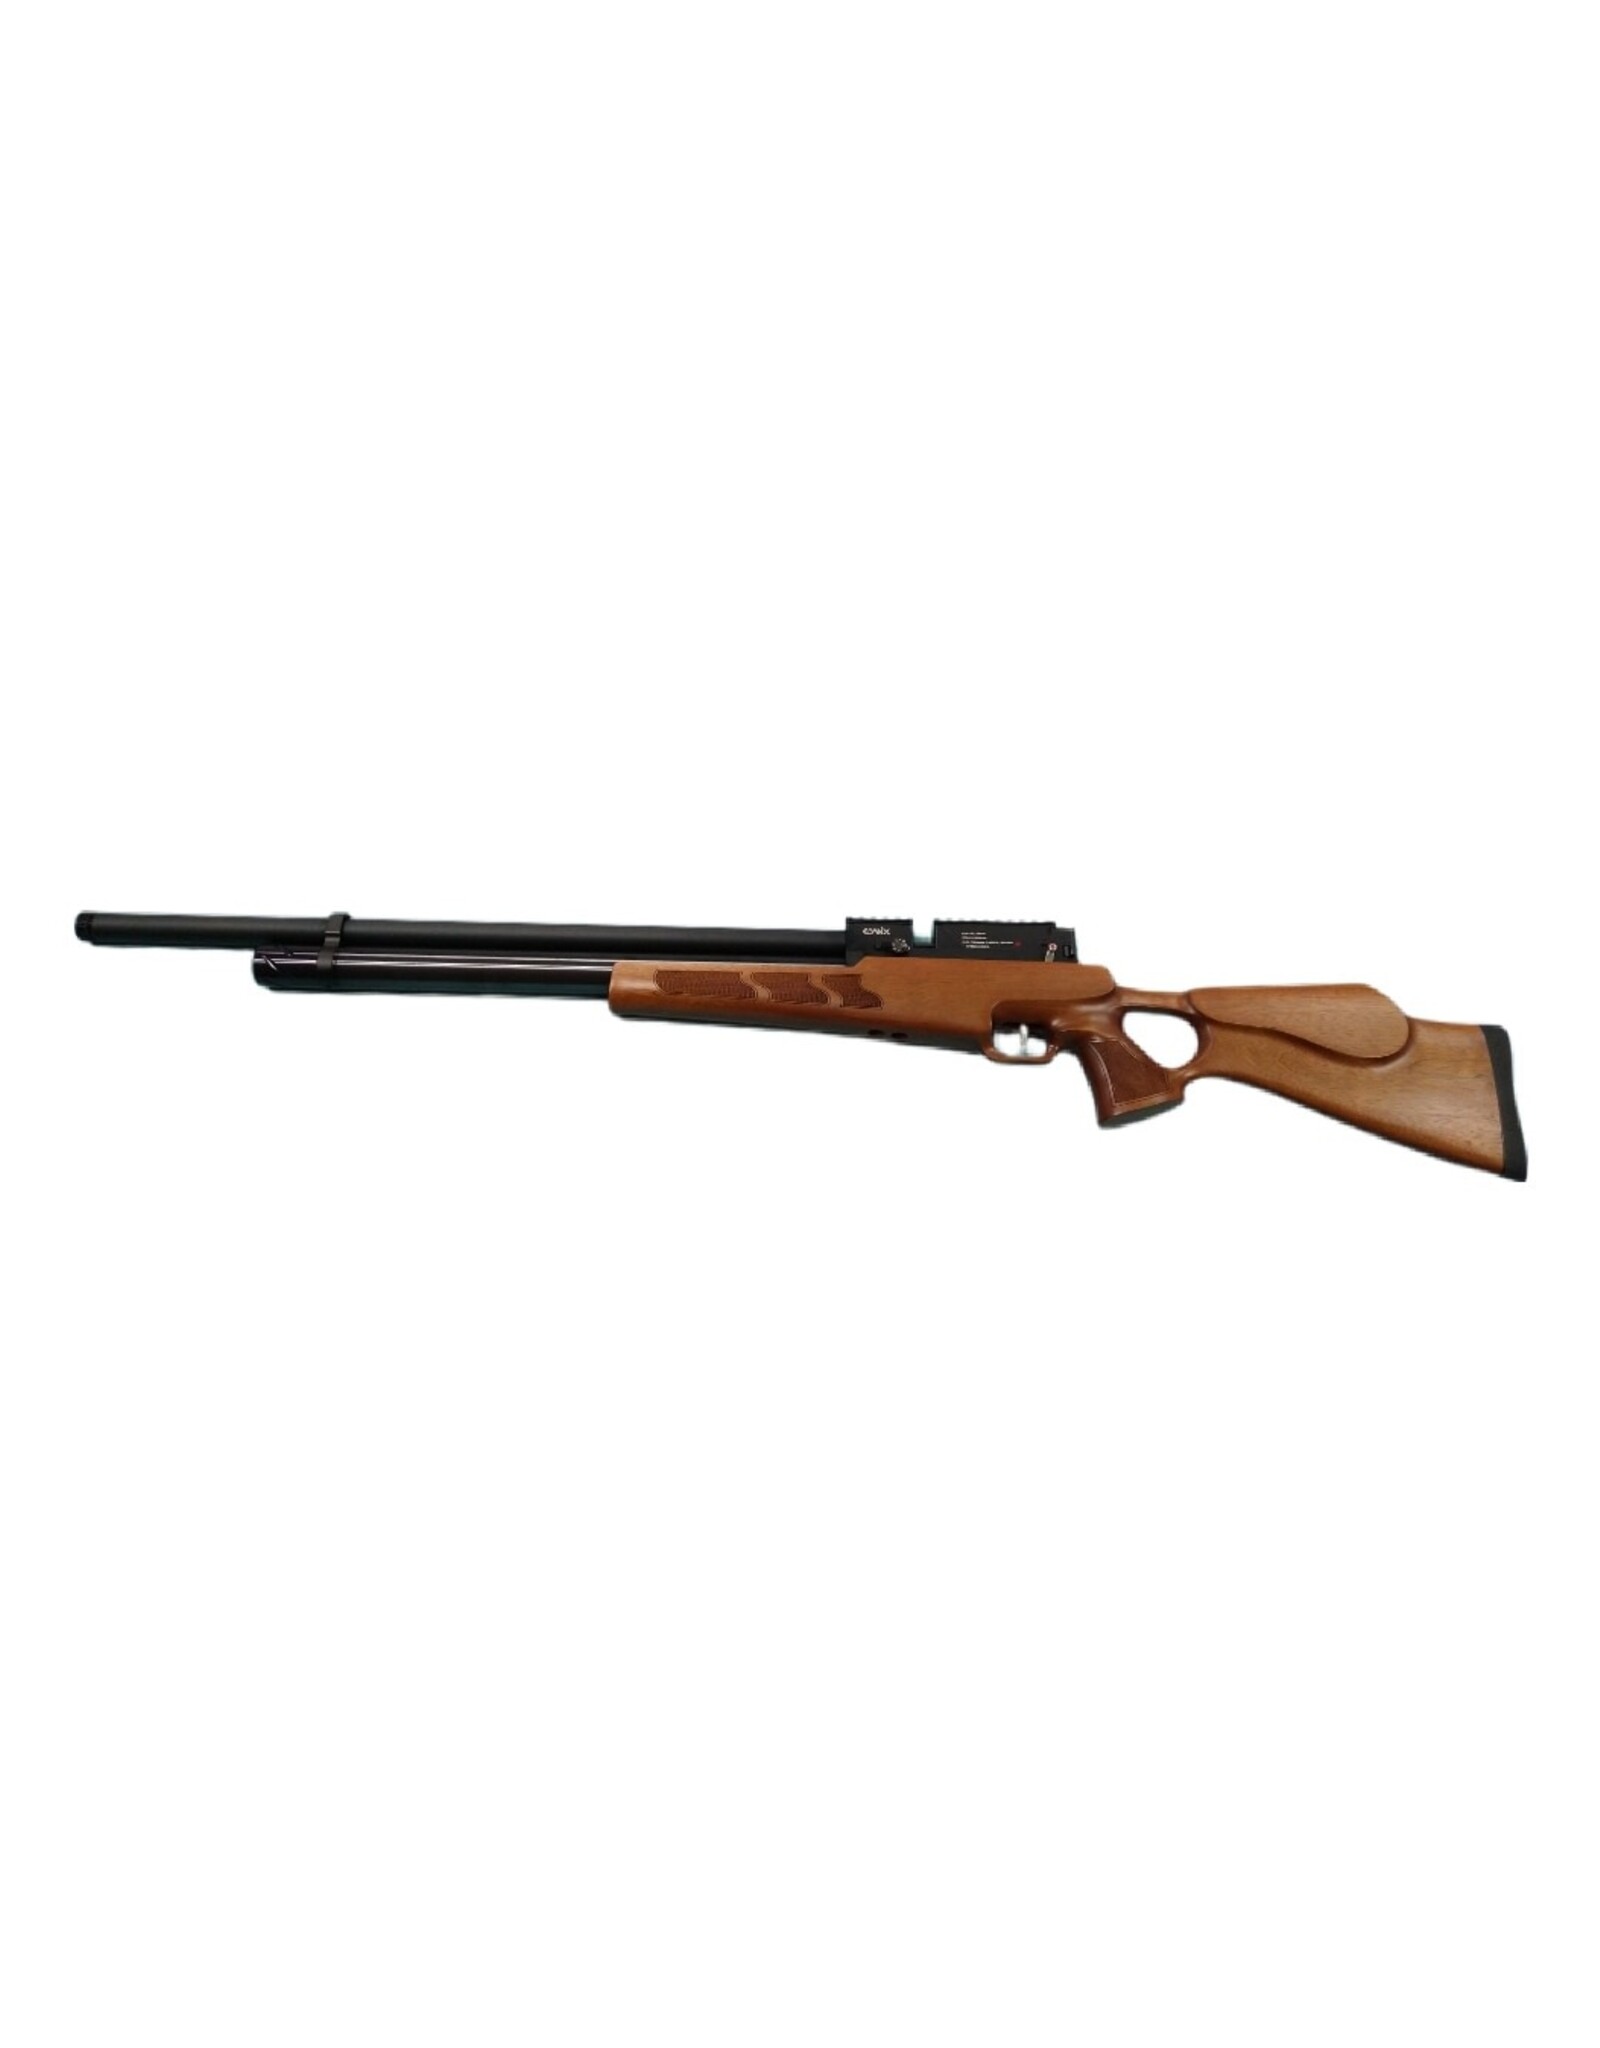 Evanix .22 (5.5mm) Evanix Air Speed PCP Air Rifle with Wood Stock